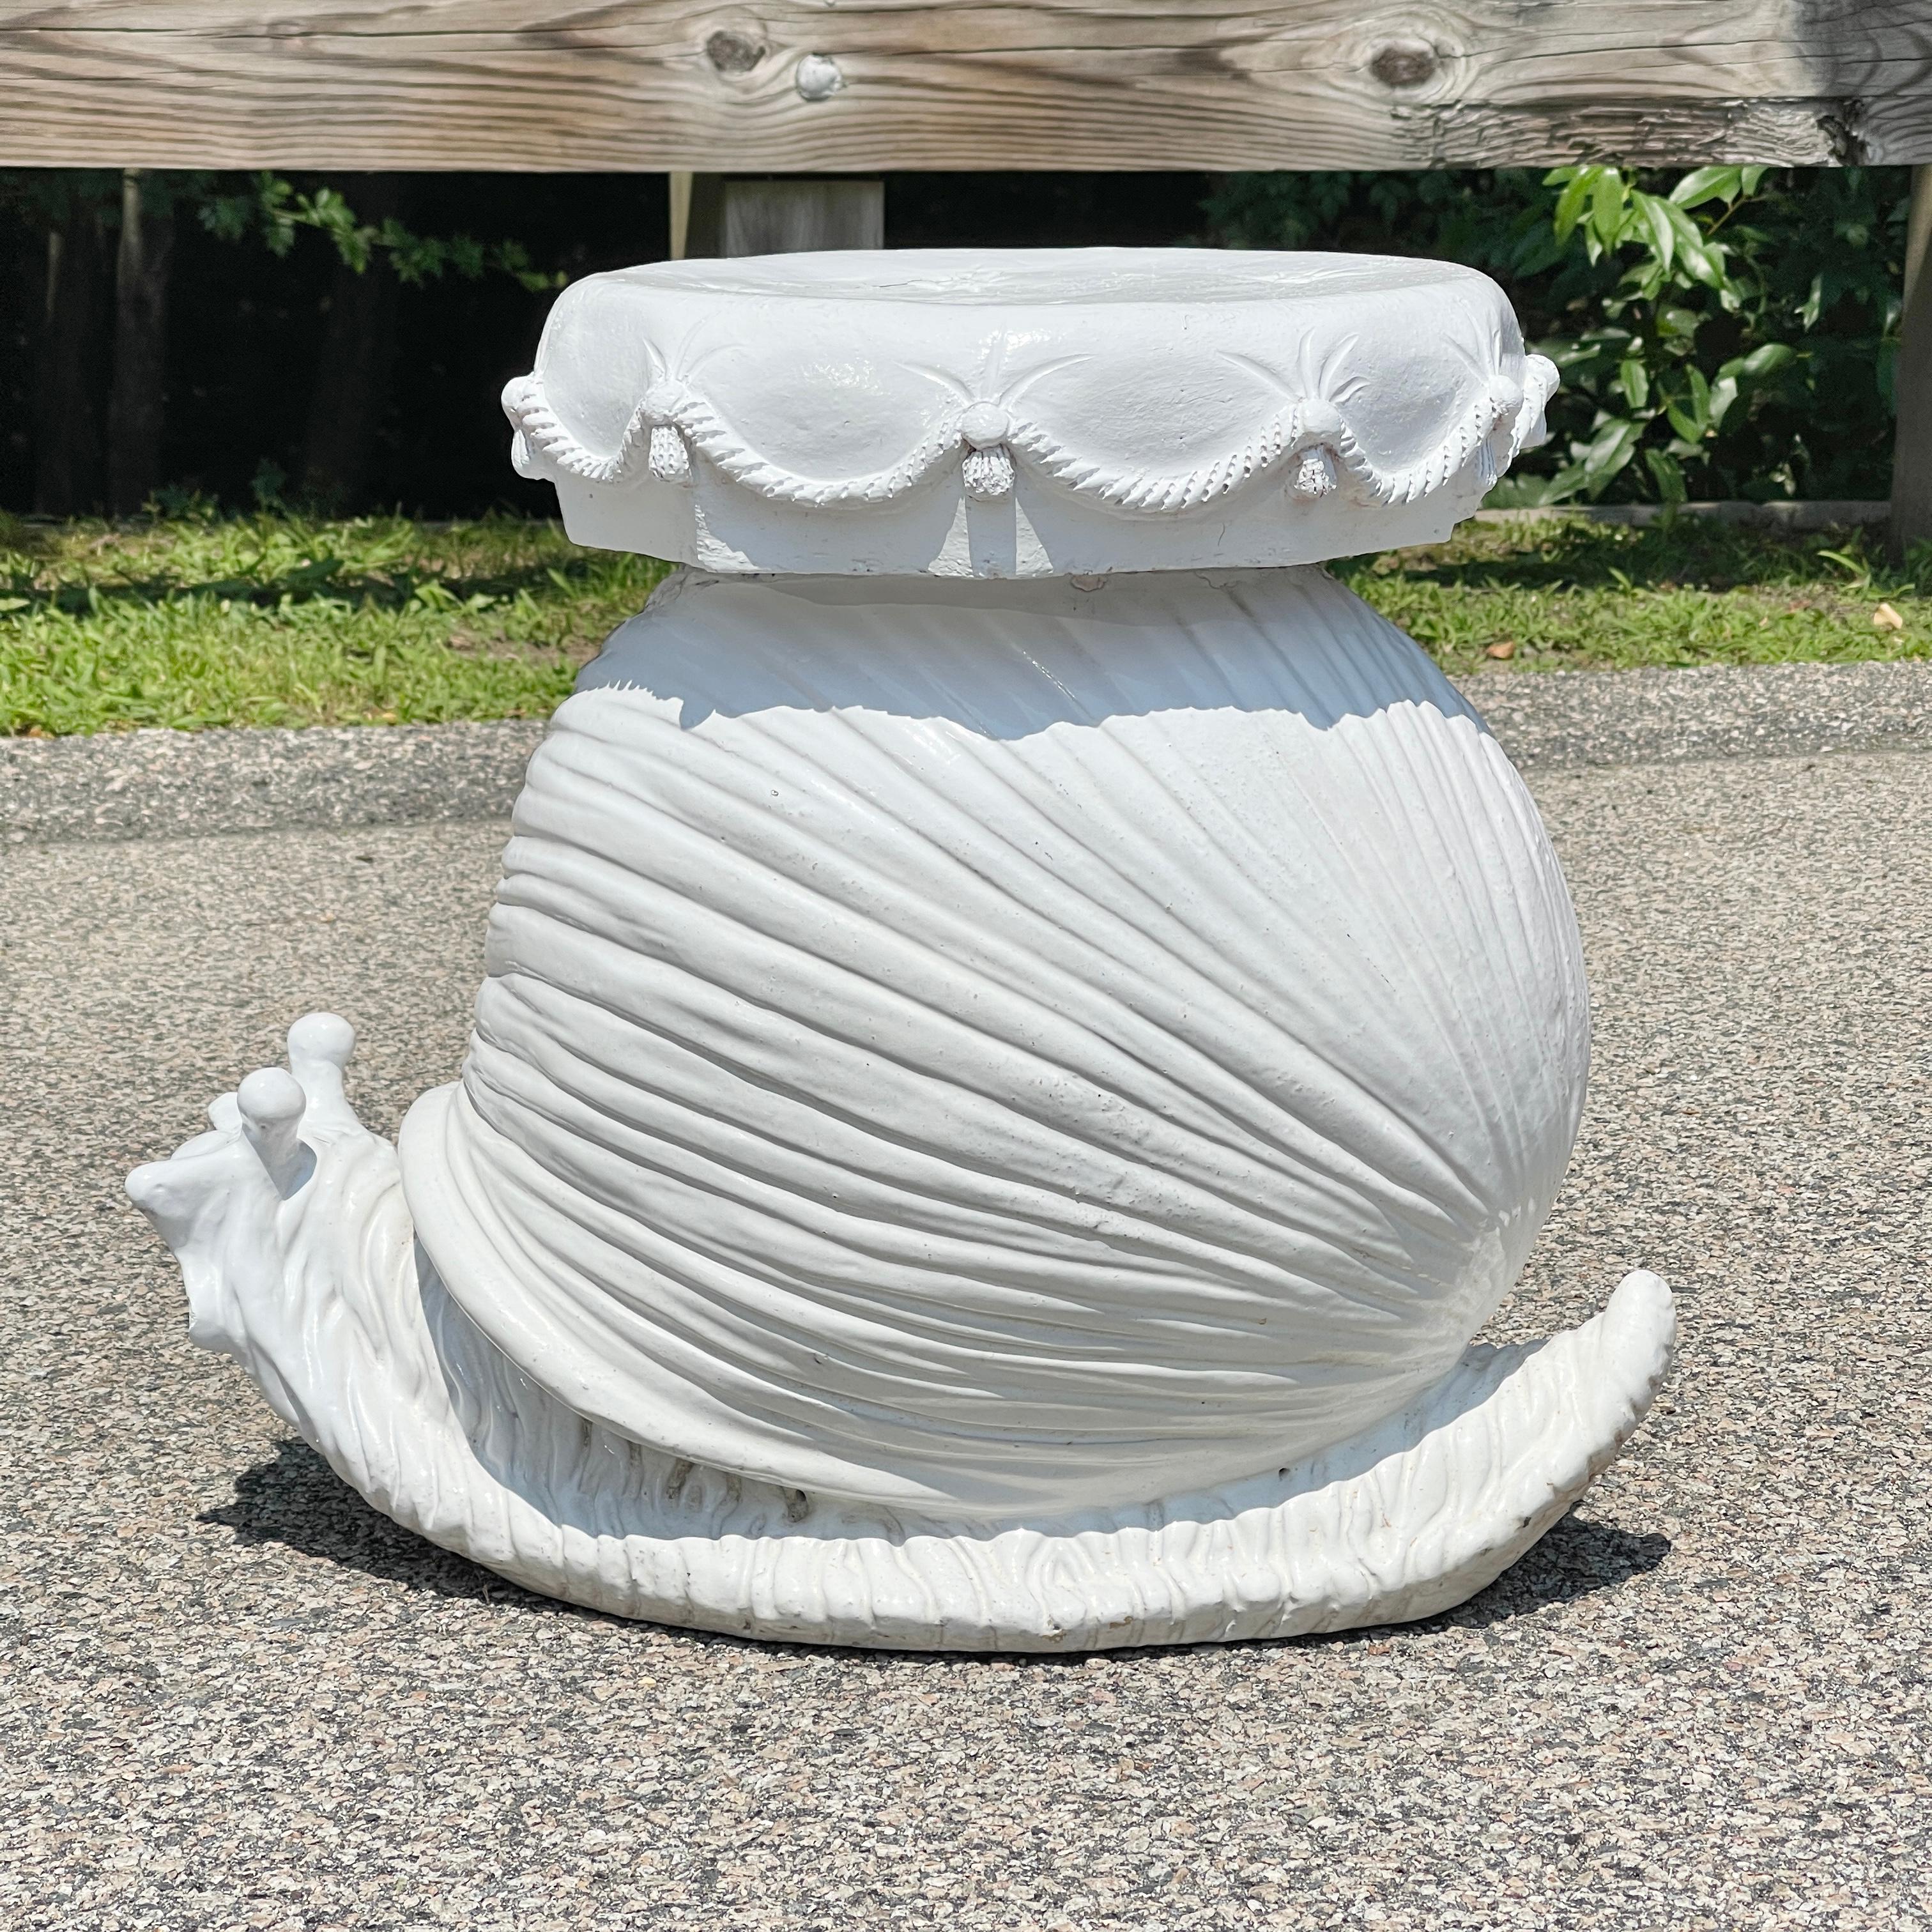 Enchanting white enamel glazed terracotta stool or side table in the form of a snail curiously looking out from its stylized shell and having a faux button tufted cushion seat embellished with braided rope and tassels. Imported from Italy during the